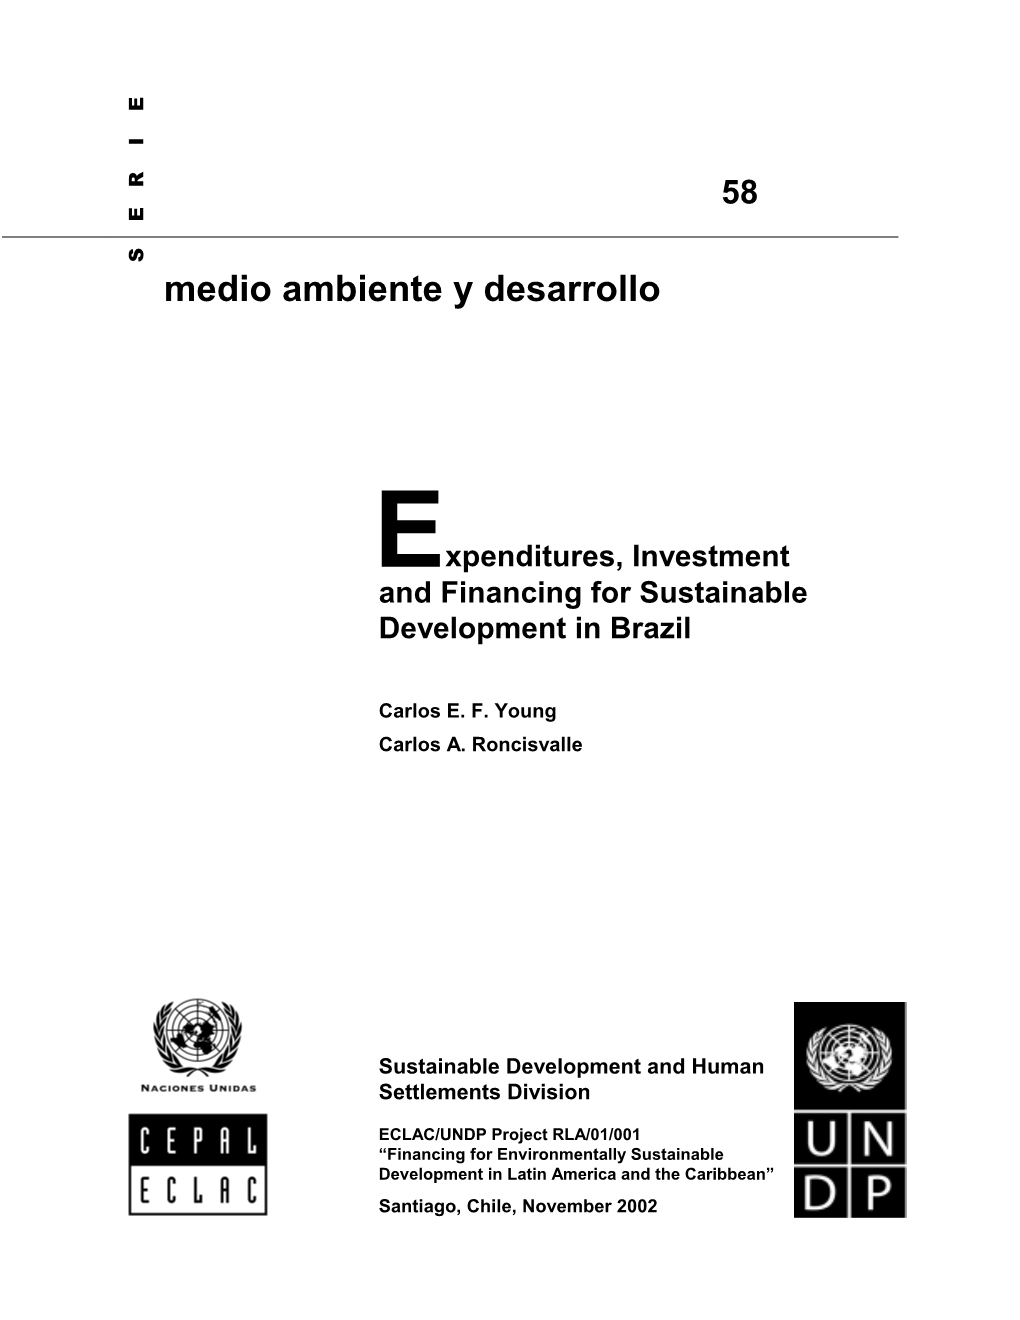 Expenditures, Investment and Financing for Sustainable Development in Brazil